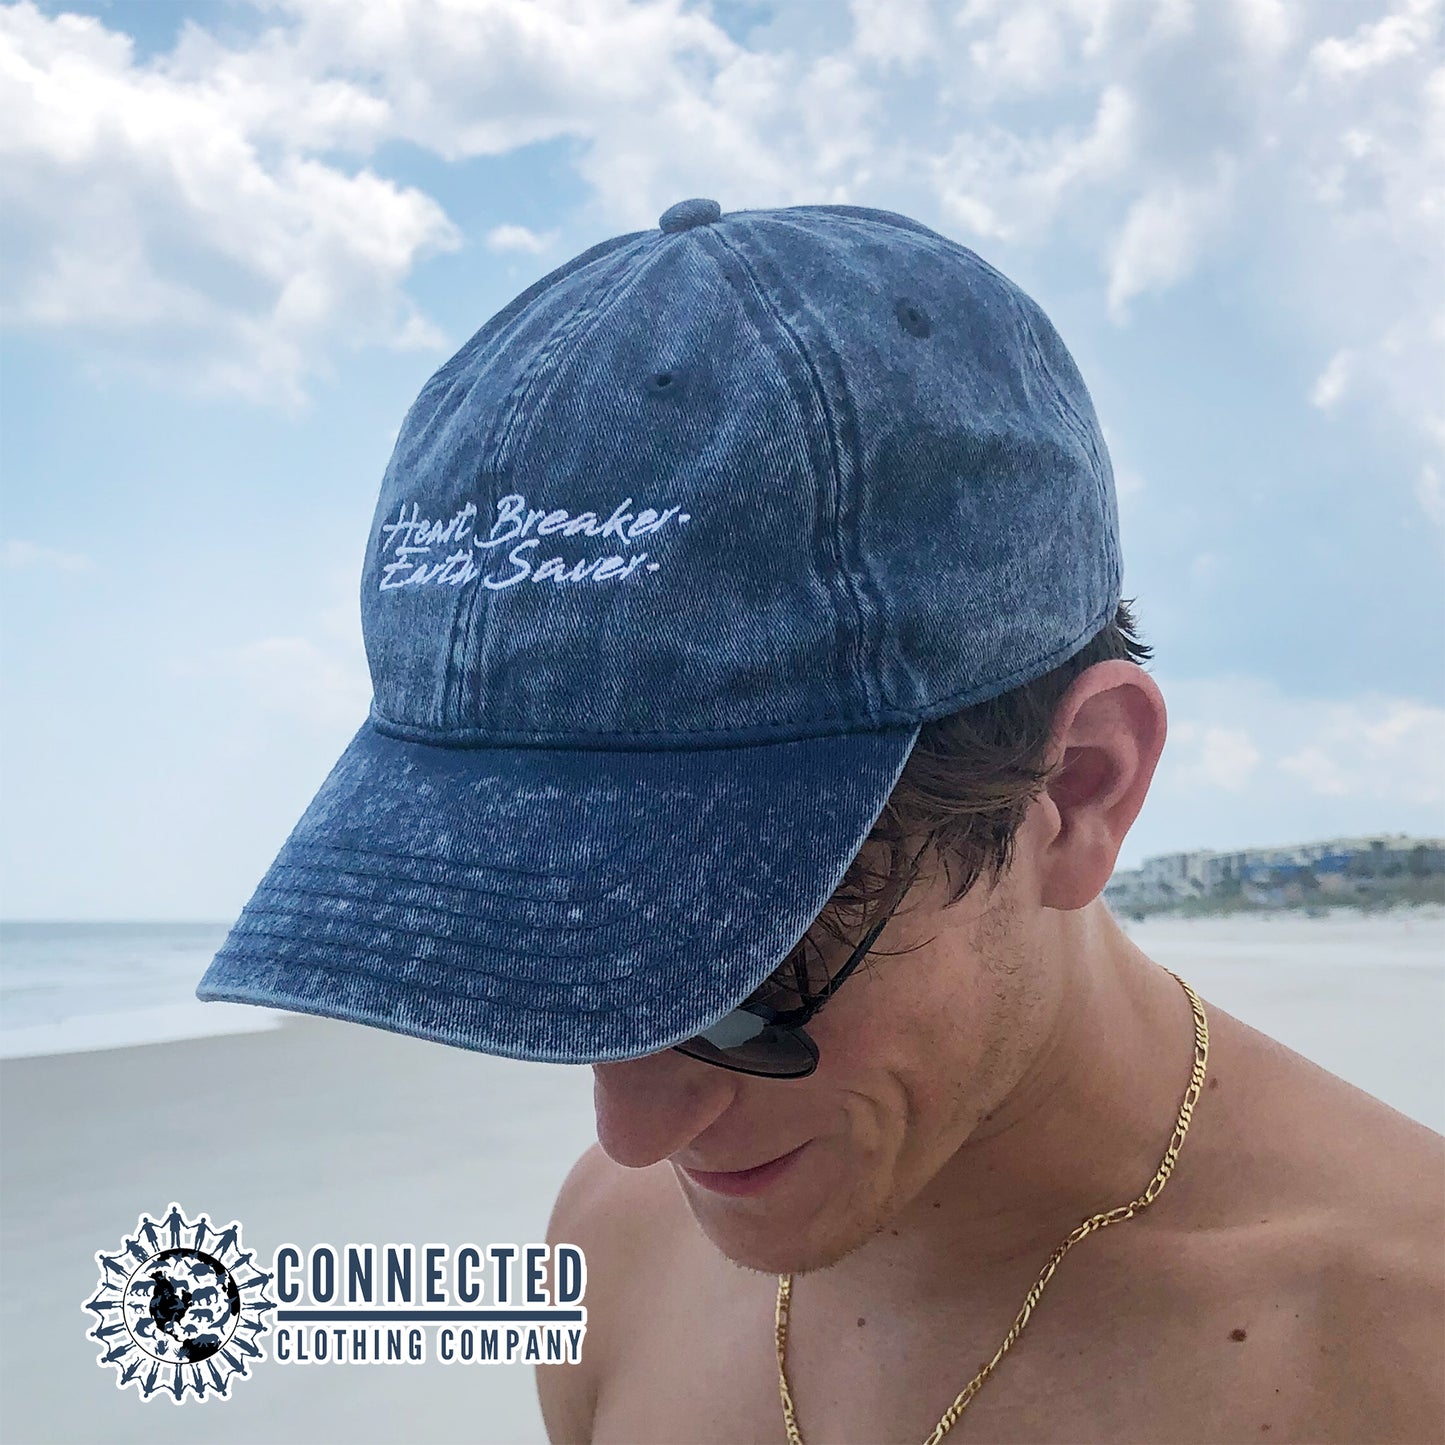 Heart Breaker. Earth Saver. Cotton Dad Hat - Connected Clothing Company - Ethically and Sustainably Made - 10% donated to Mission Blue ocean conservation